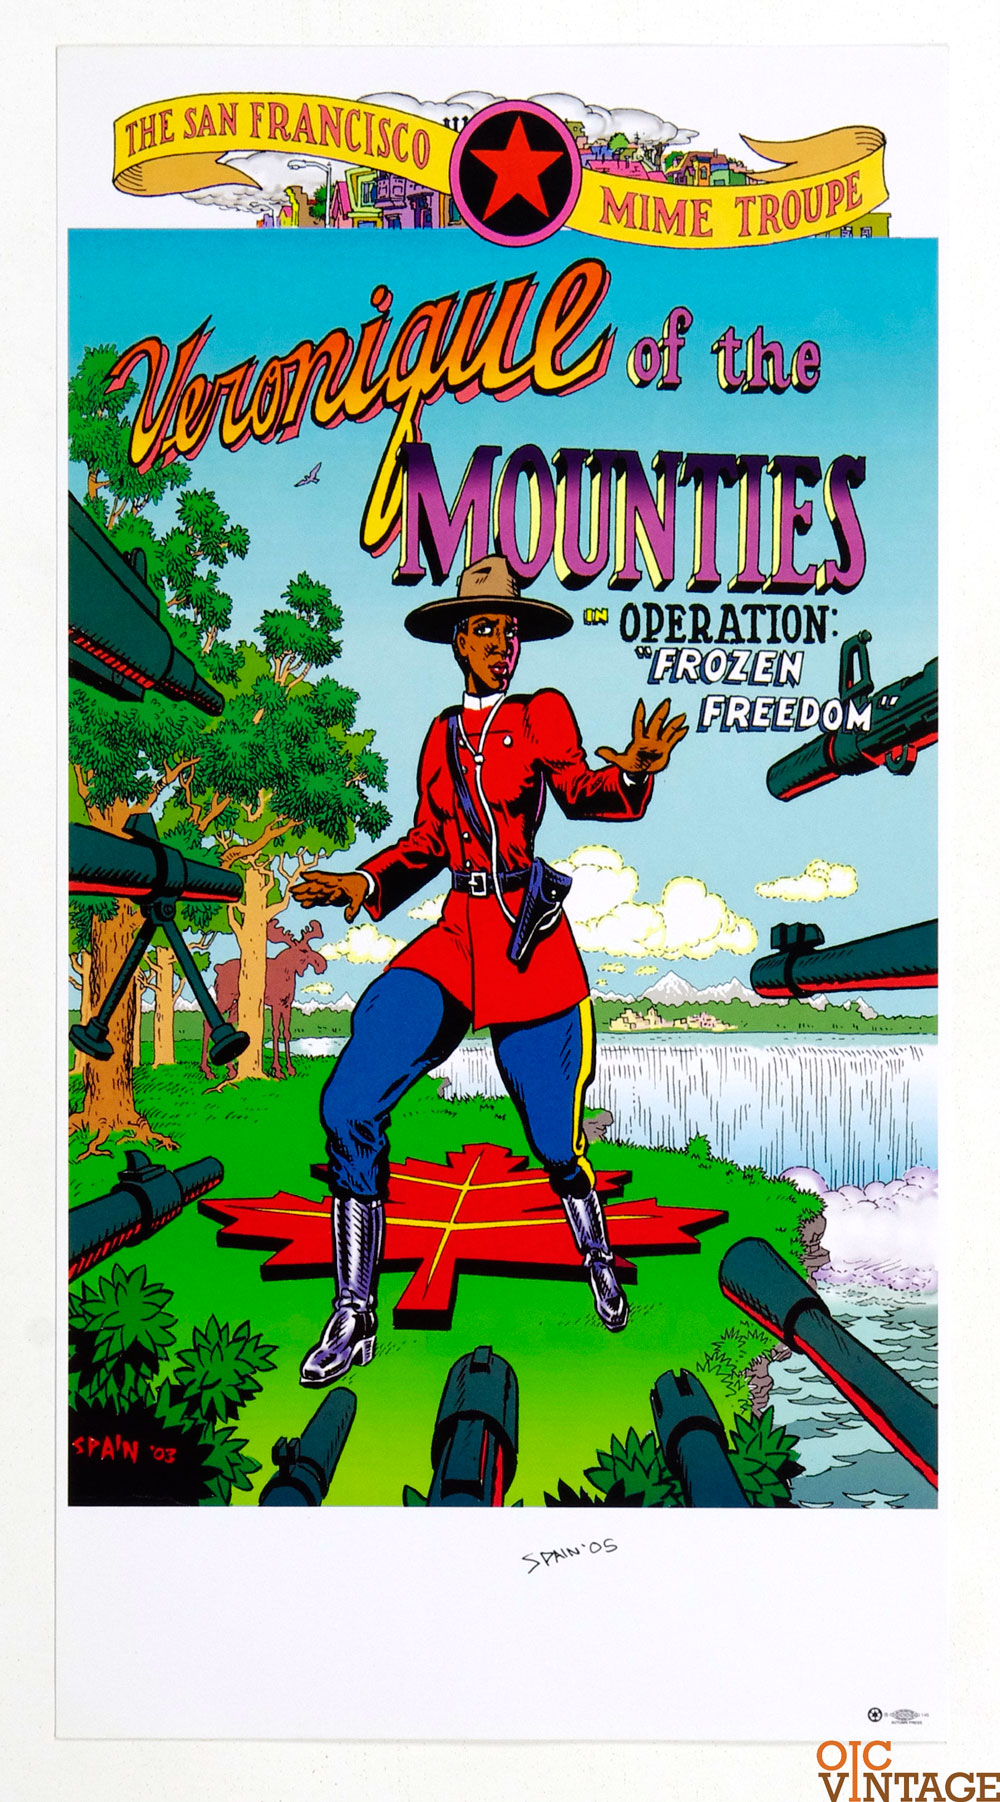 San Francisco Mime Troupe Poster 2003 Veronique of the Mounties Spain Rodriguez signed